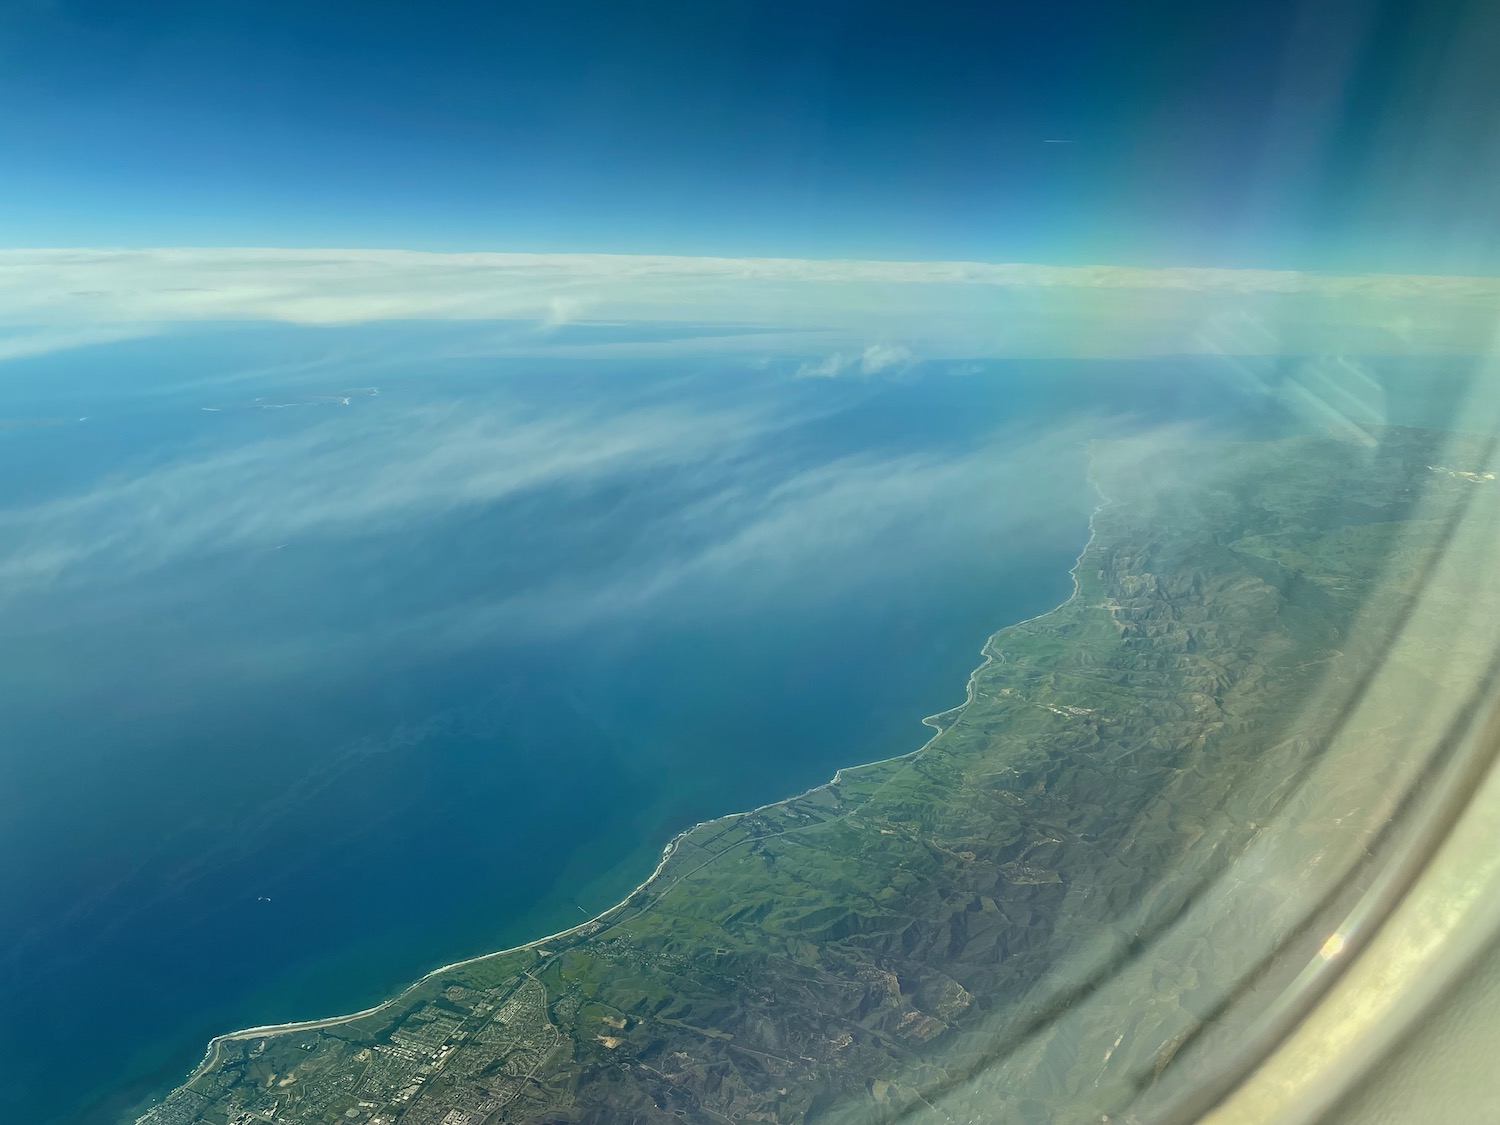 a view of the ocean from an airplane window